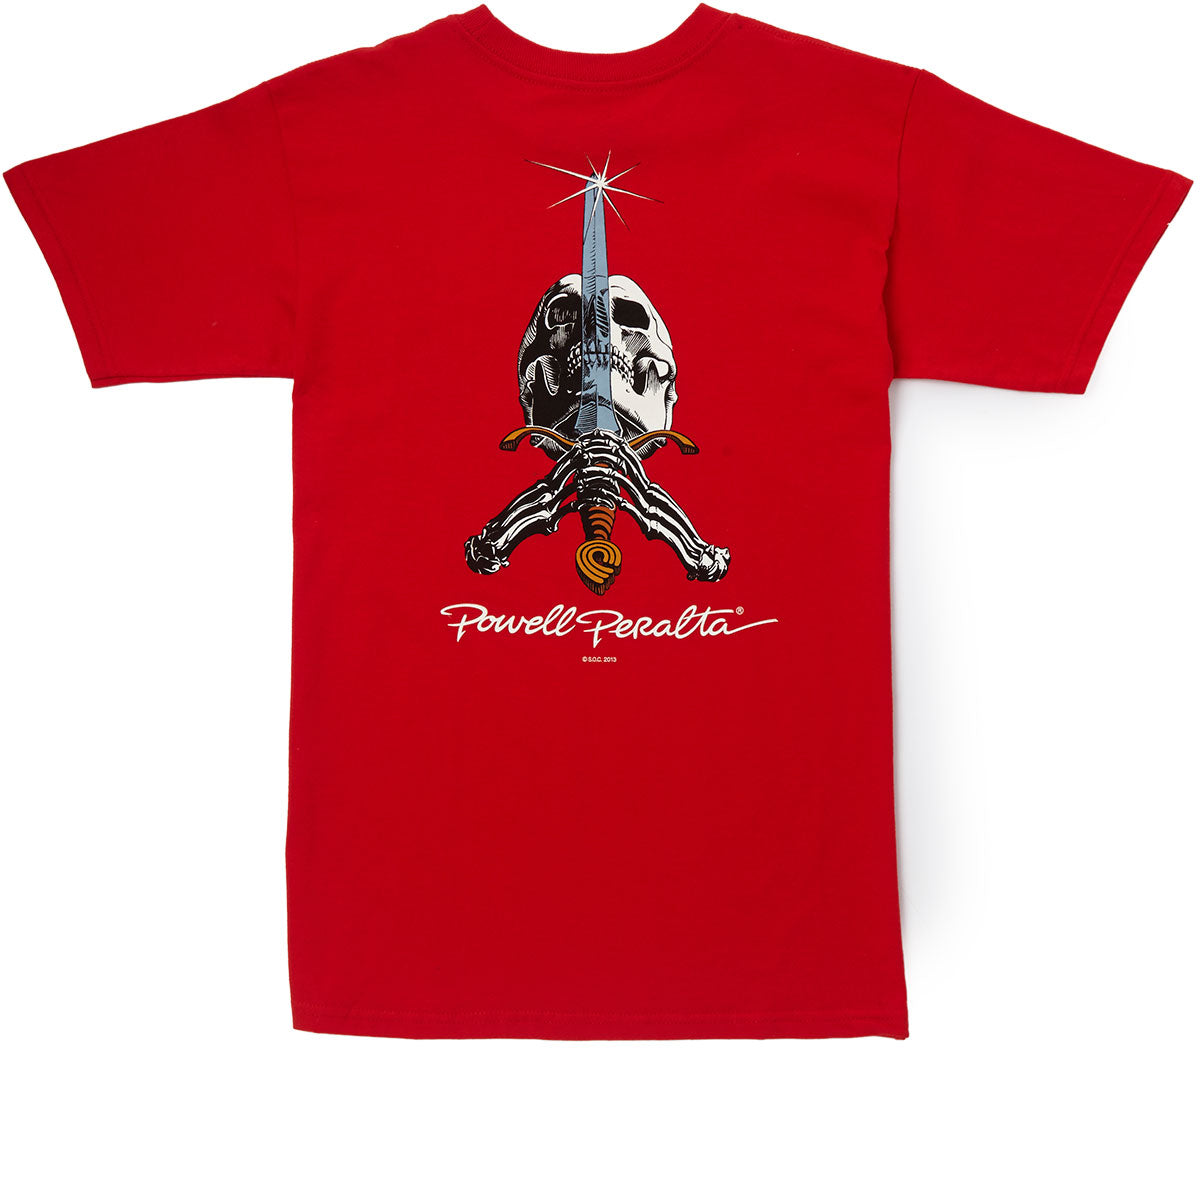 Powell-Peralta Skull And Sword T-Shirt - Red image 1